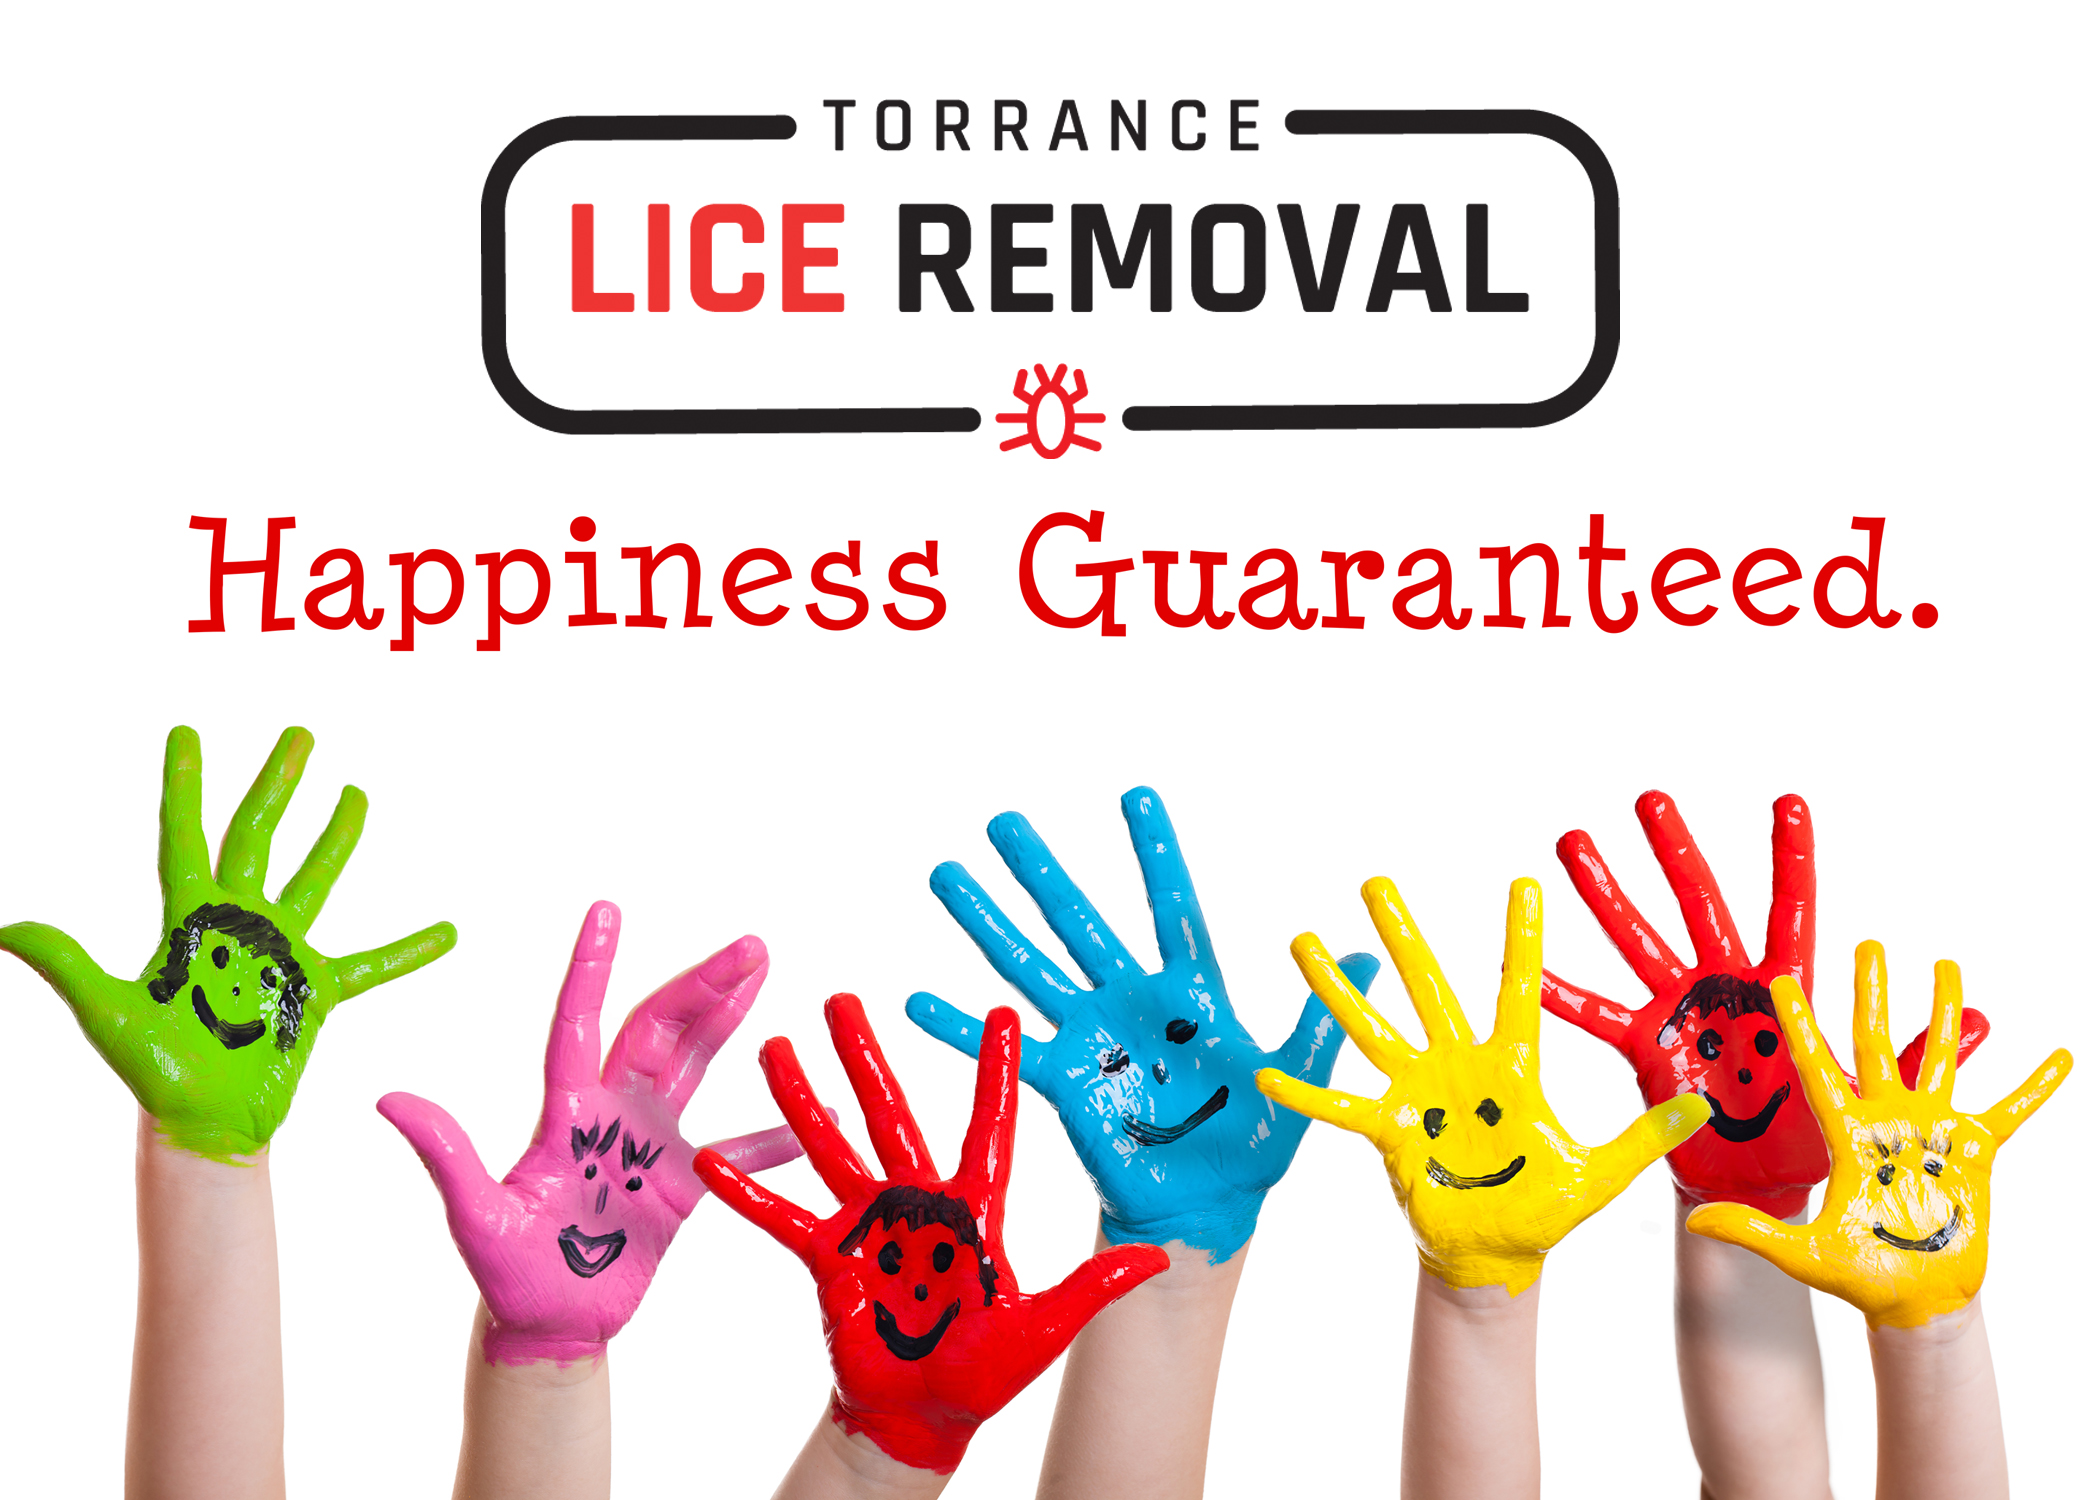 5 Lice Facts - TorranceCARD copy